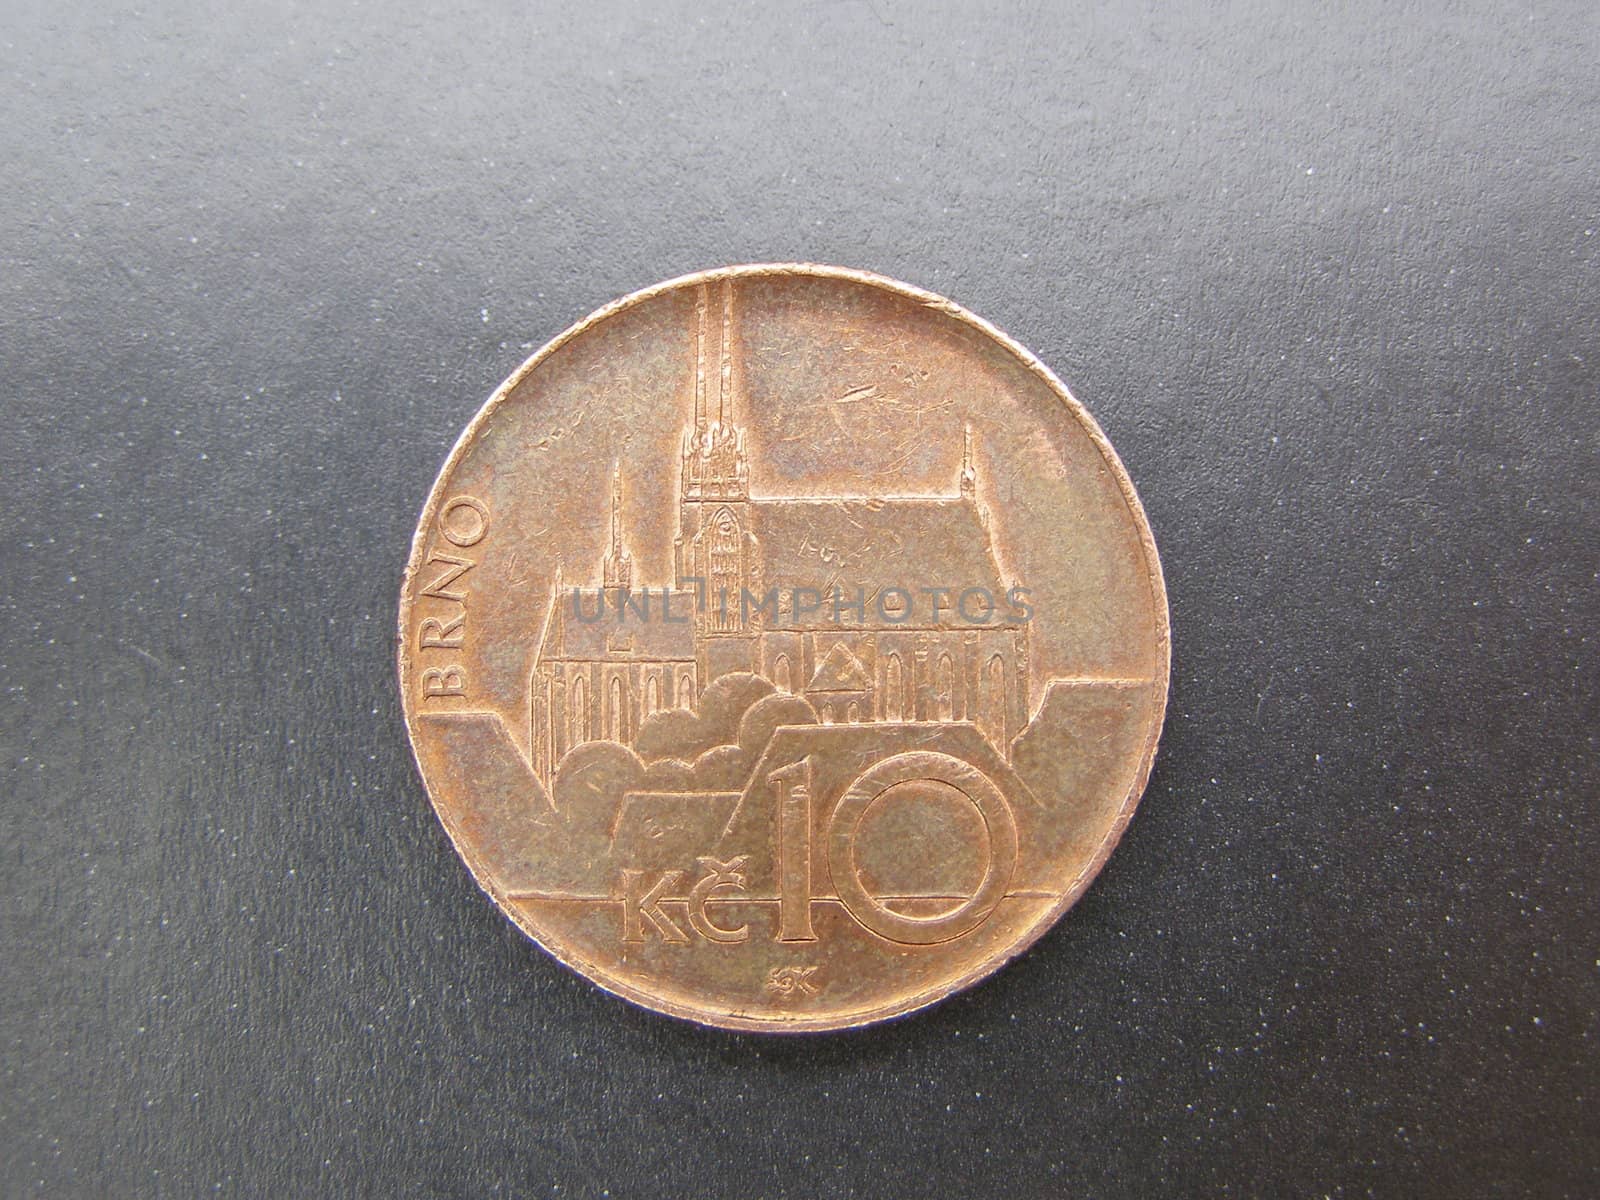 Czech coin with Brno cathedral depicted on it by paolo77